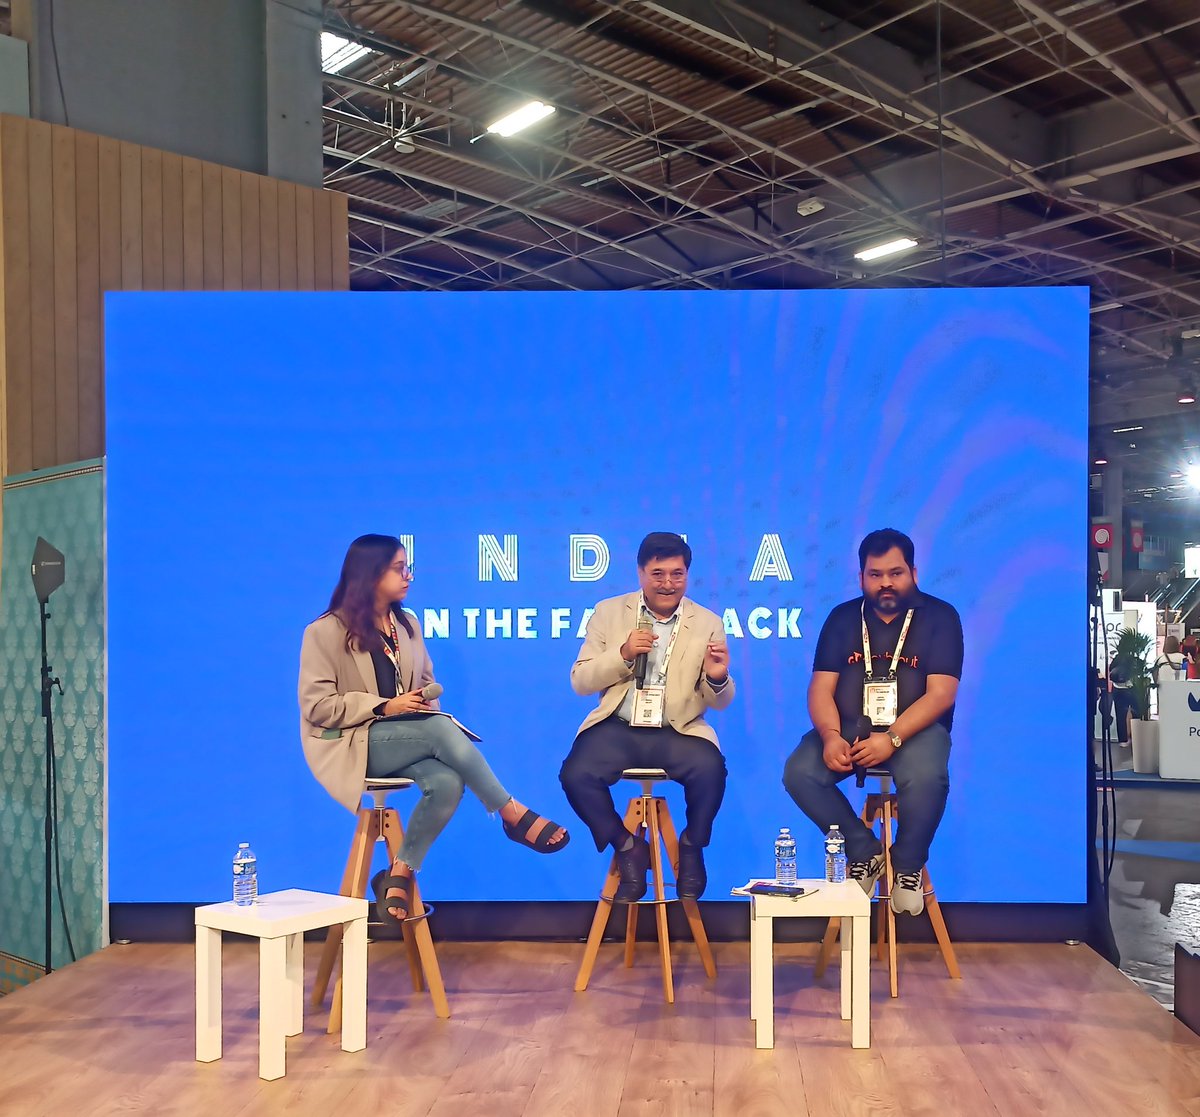 Day 4 at #VivaTech22 and I got the opportunity to speak about the work @UNDP_India is doing to promote #inclusion and #diversity in the #entrepreneurshipecosystem! W @i2safe, India Accelerator & Aditya Shankar, #Doubtnut!